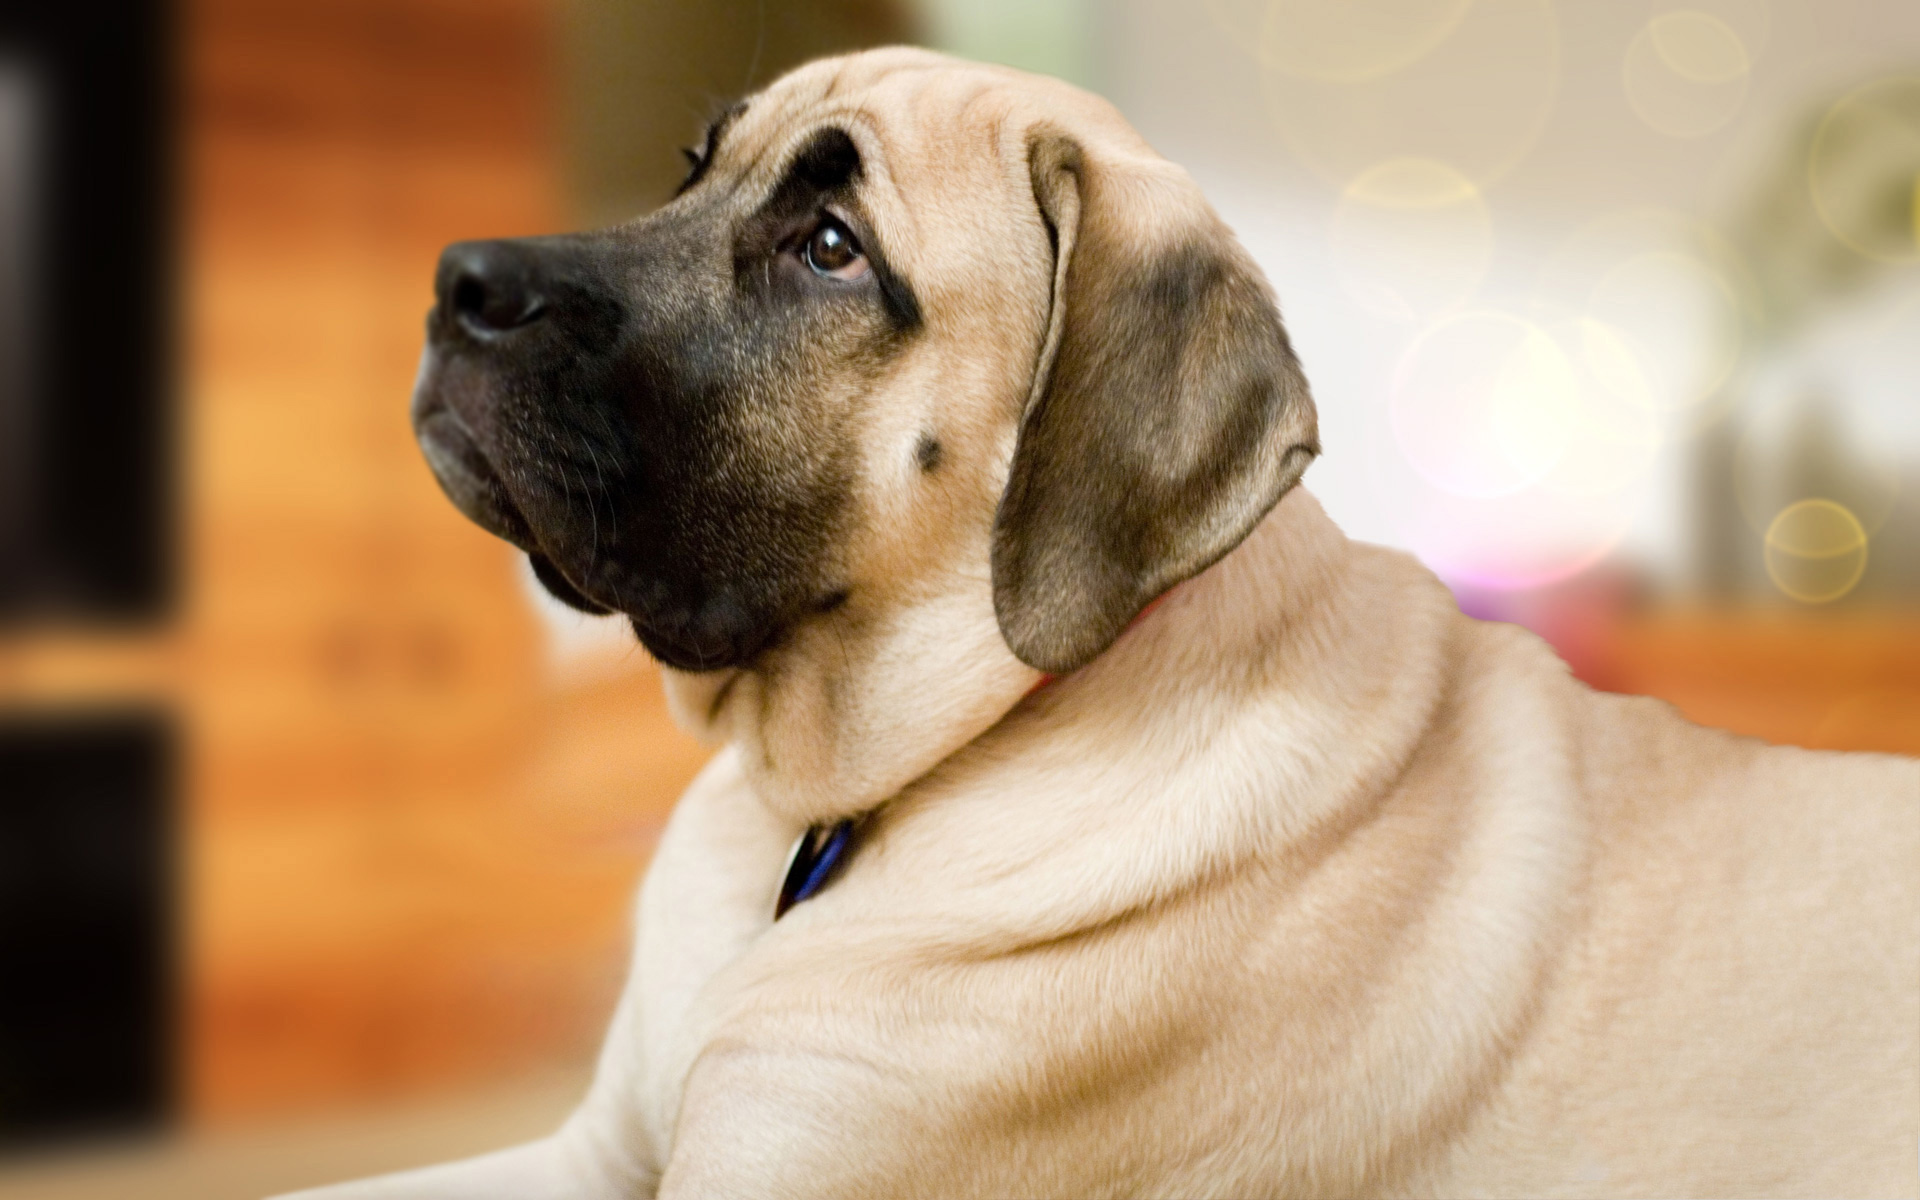  October 13 2015 By Stephen Comments Off on English Mastiff Wallpapers